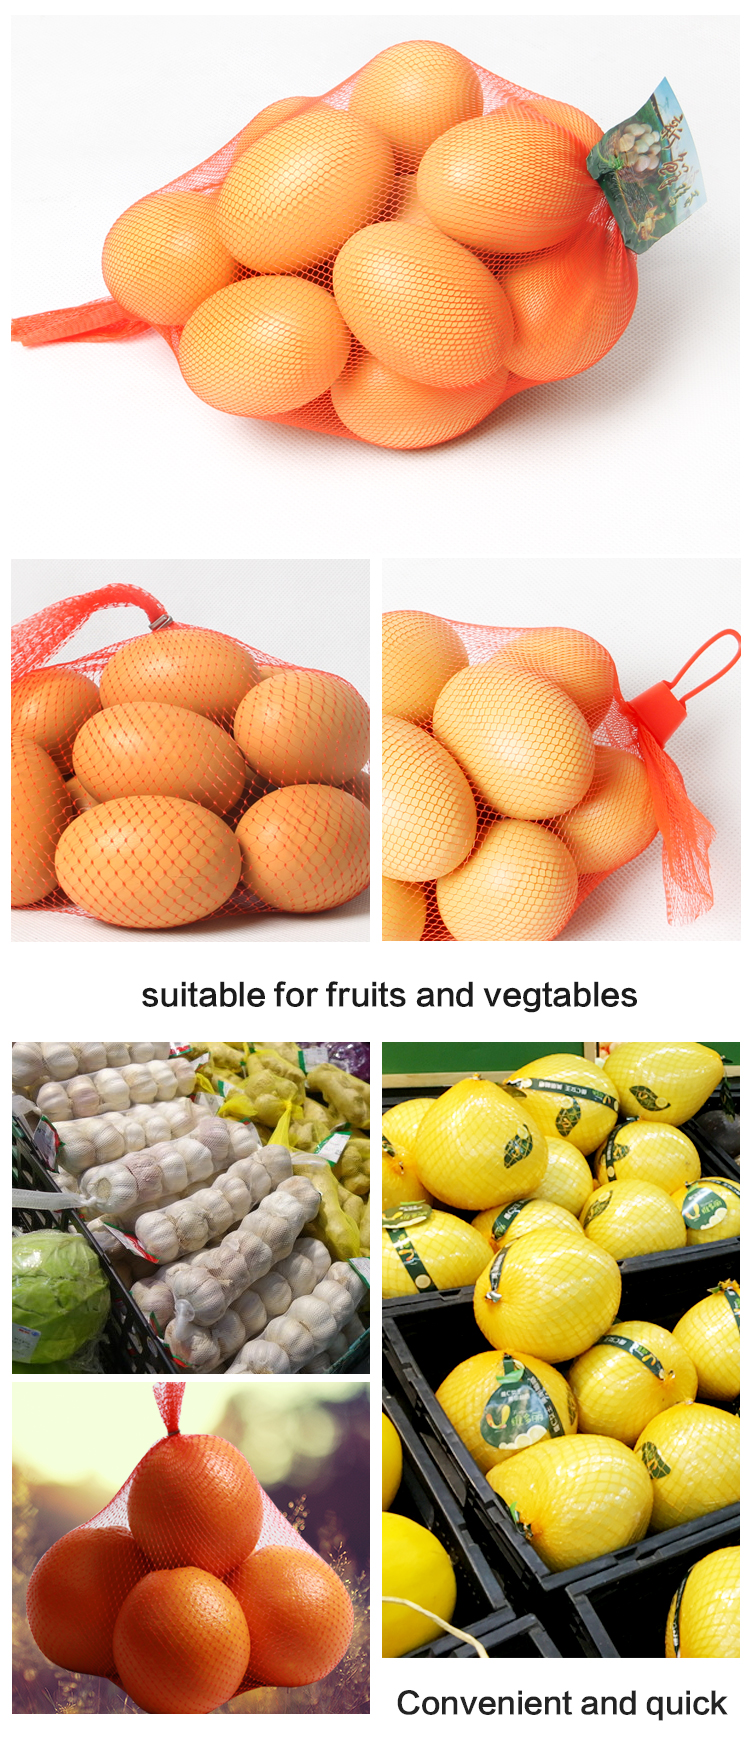 Plastic small packaging mesh bag capable of holding 15 to 20 eggs